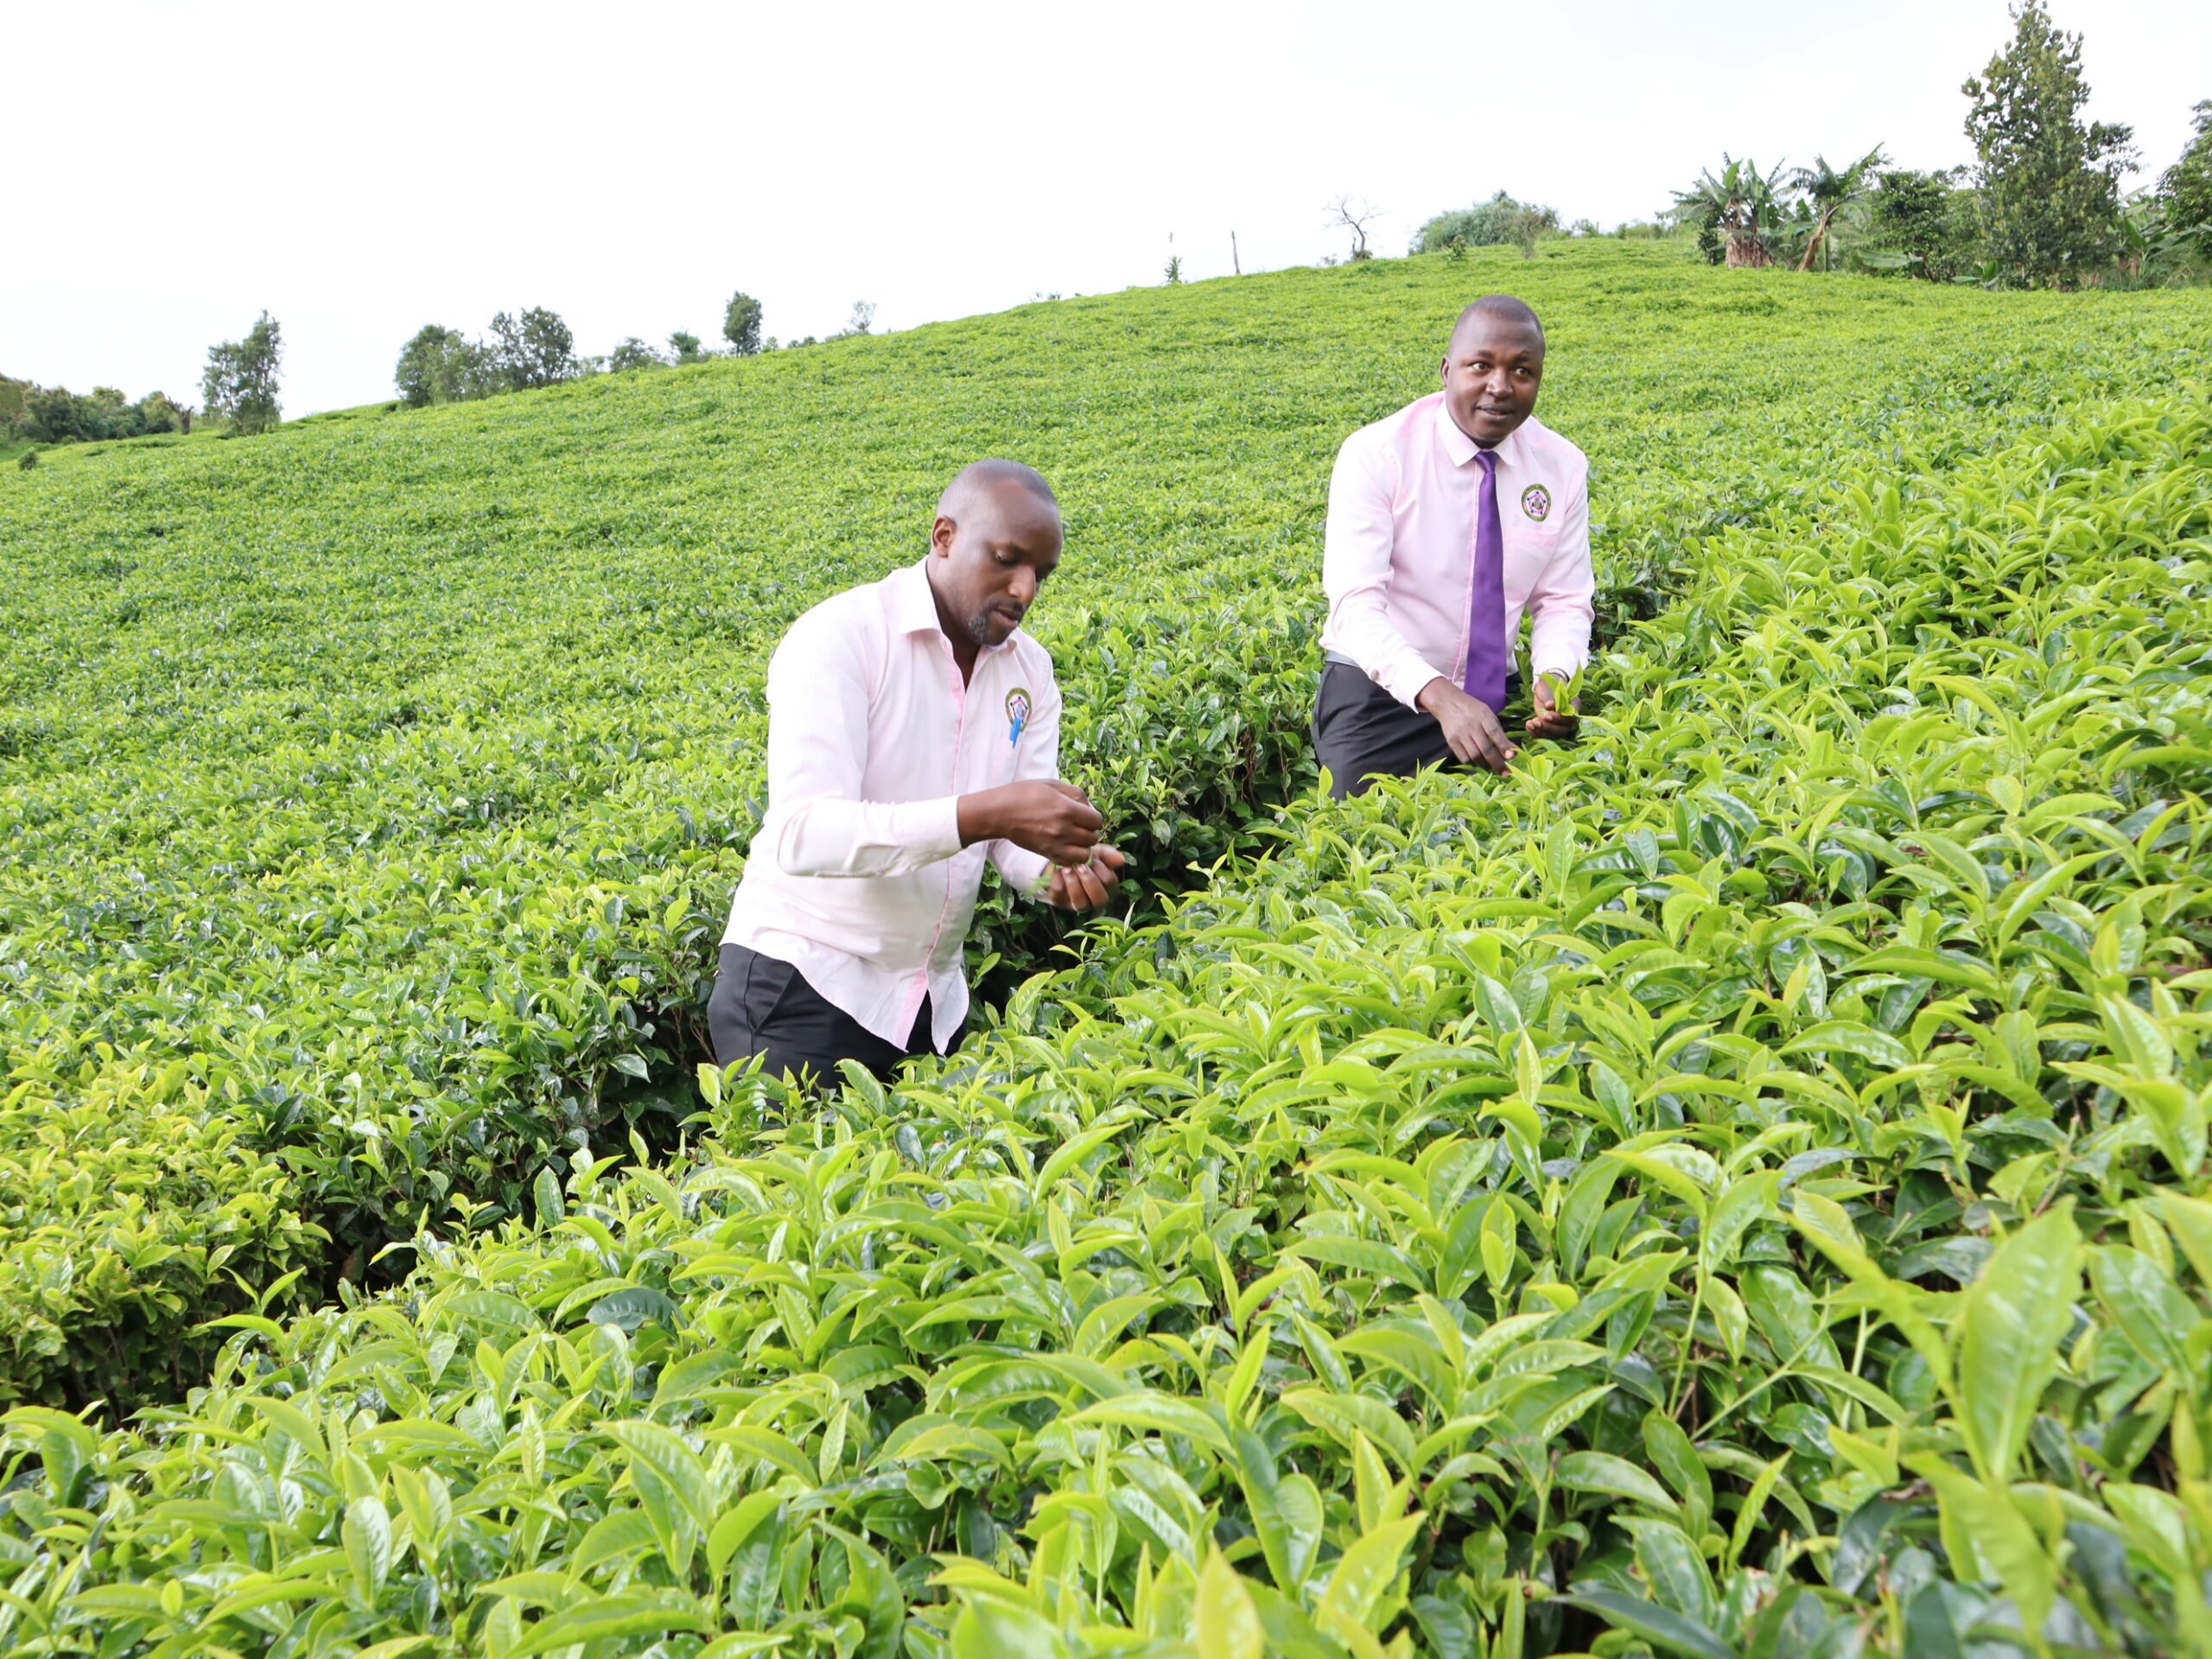 Staff learning how to harvest tea